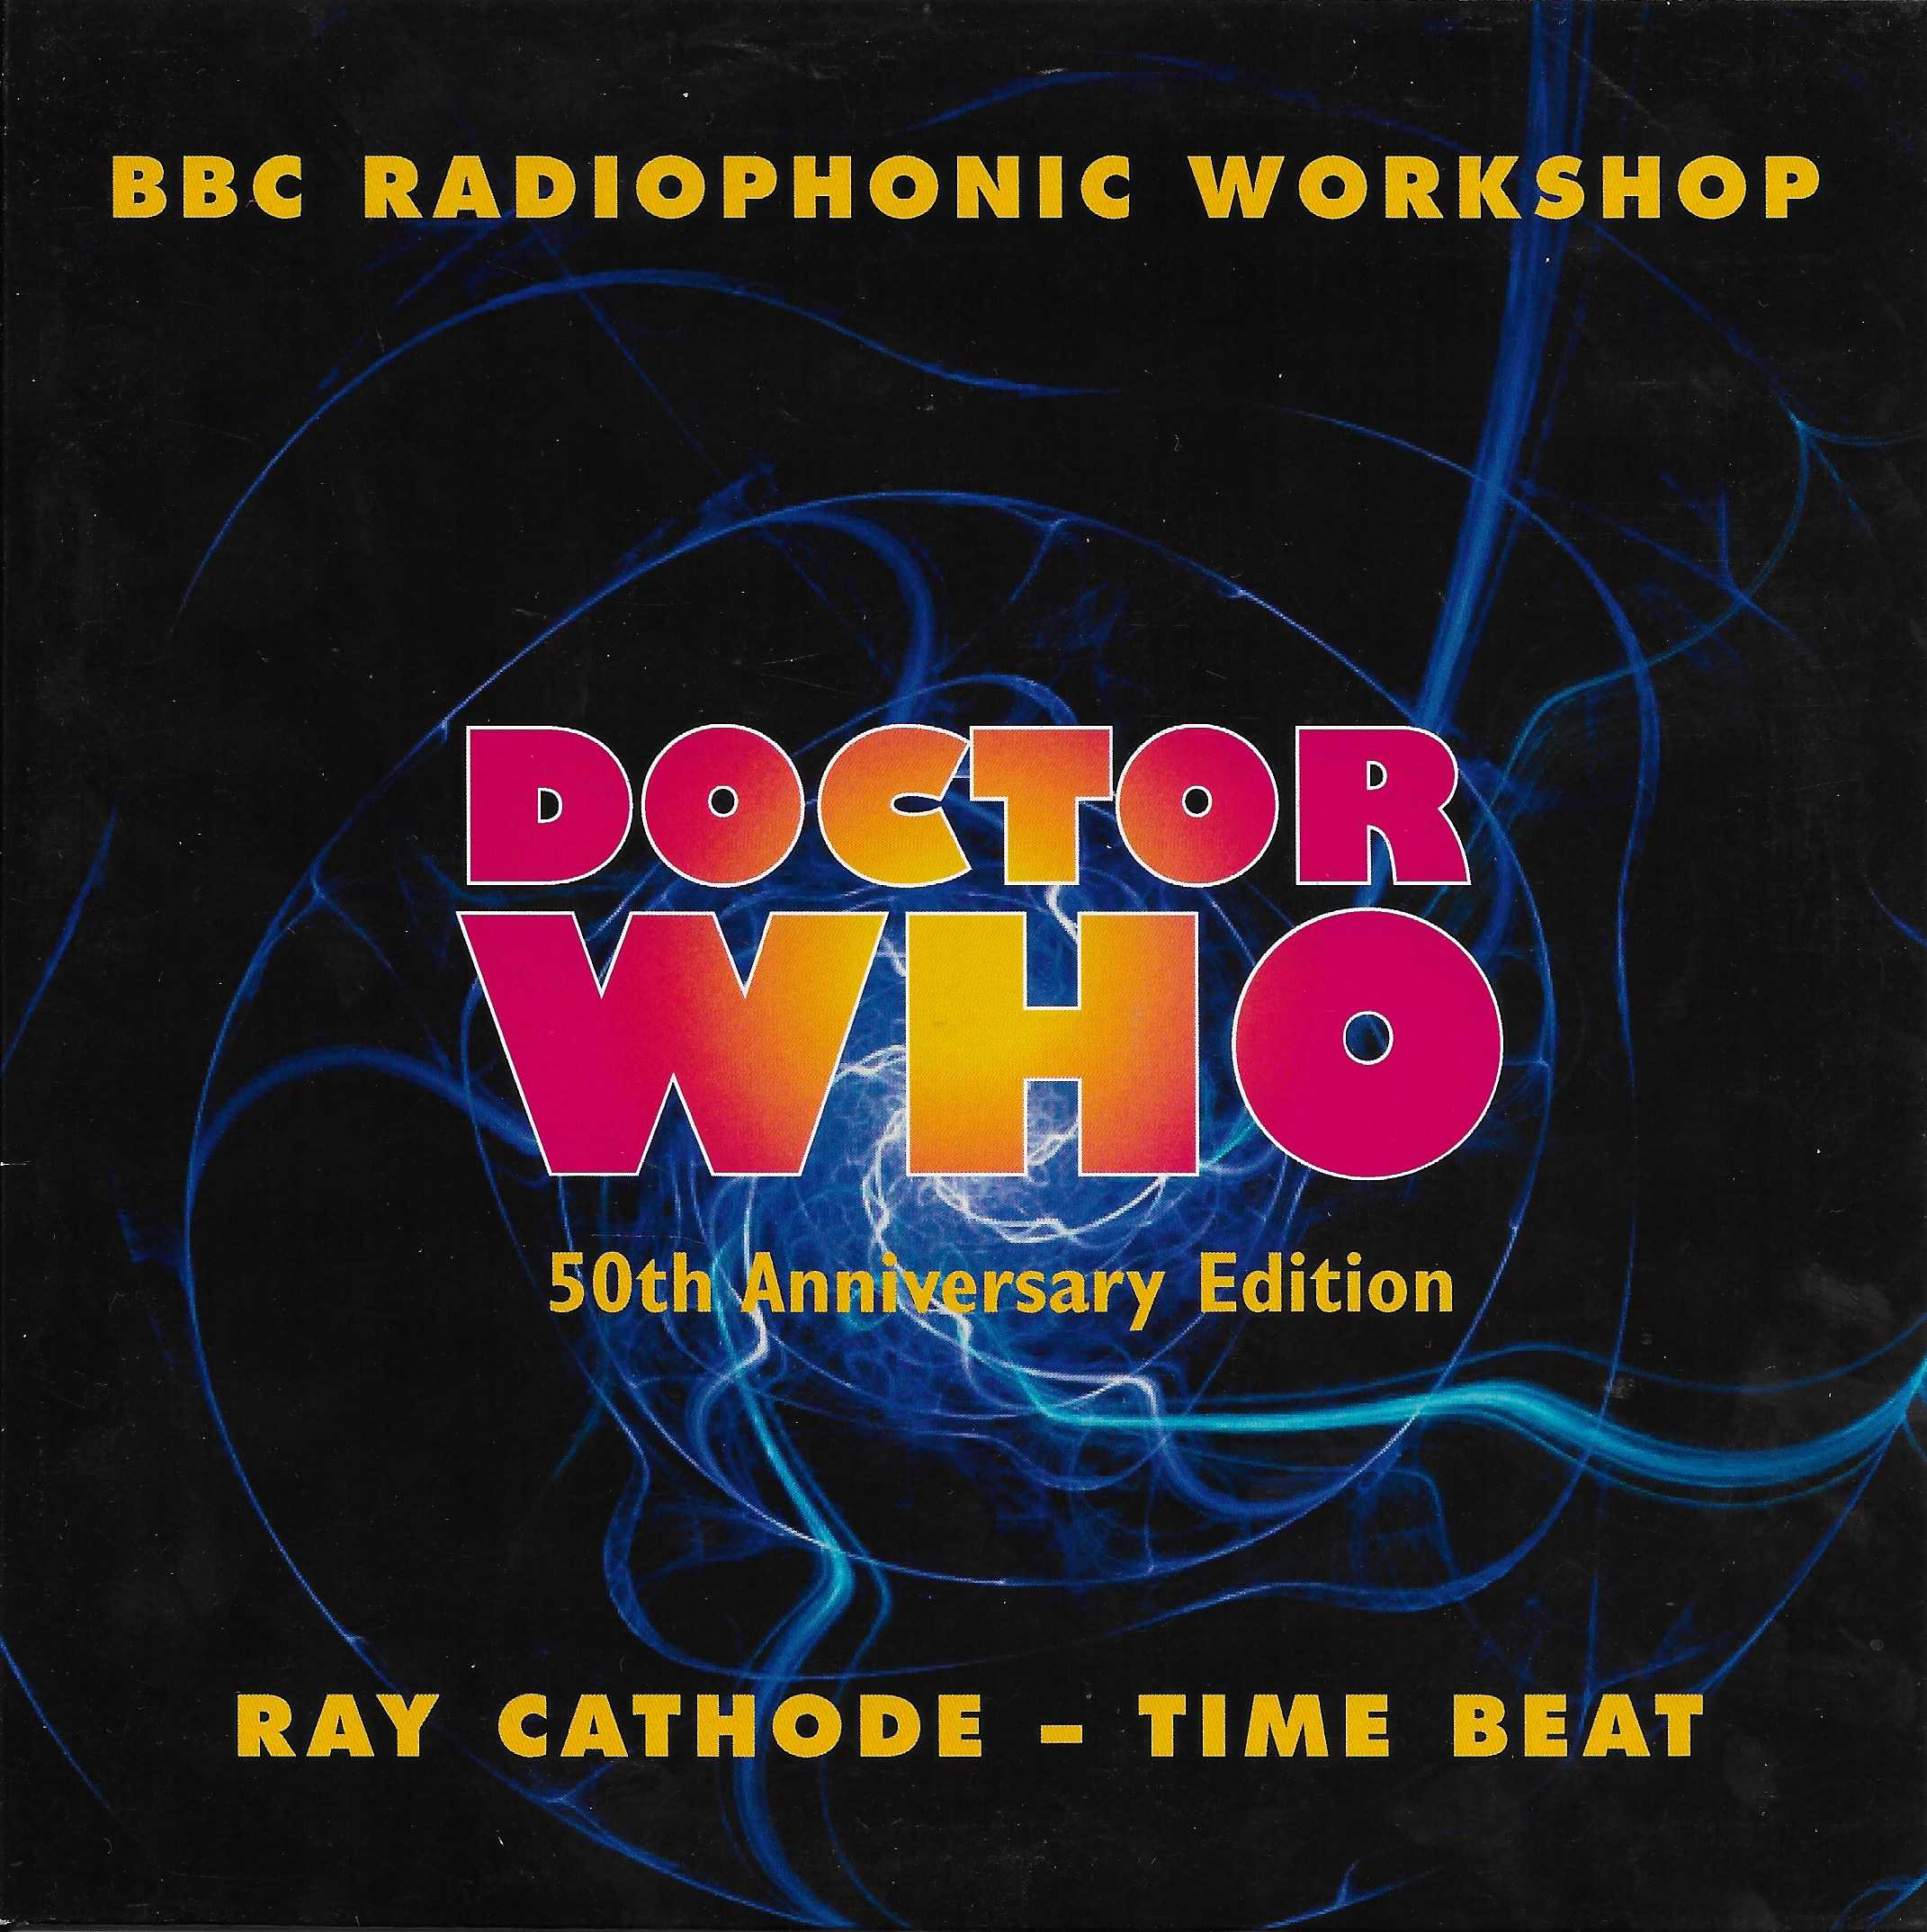 Picture of HRKS 8469 Doctor Who - 50th anniversary edition by artist Ron Grainer / Arr. Delia Derbyshire / Fagandini from the BBC records and Tapes library